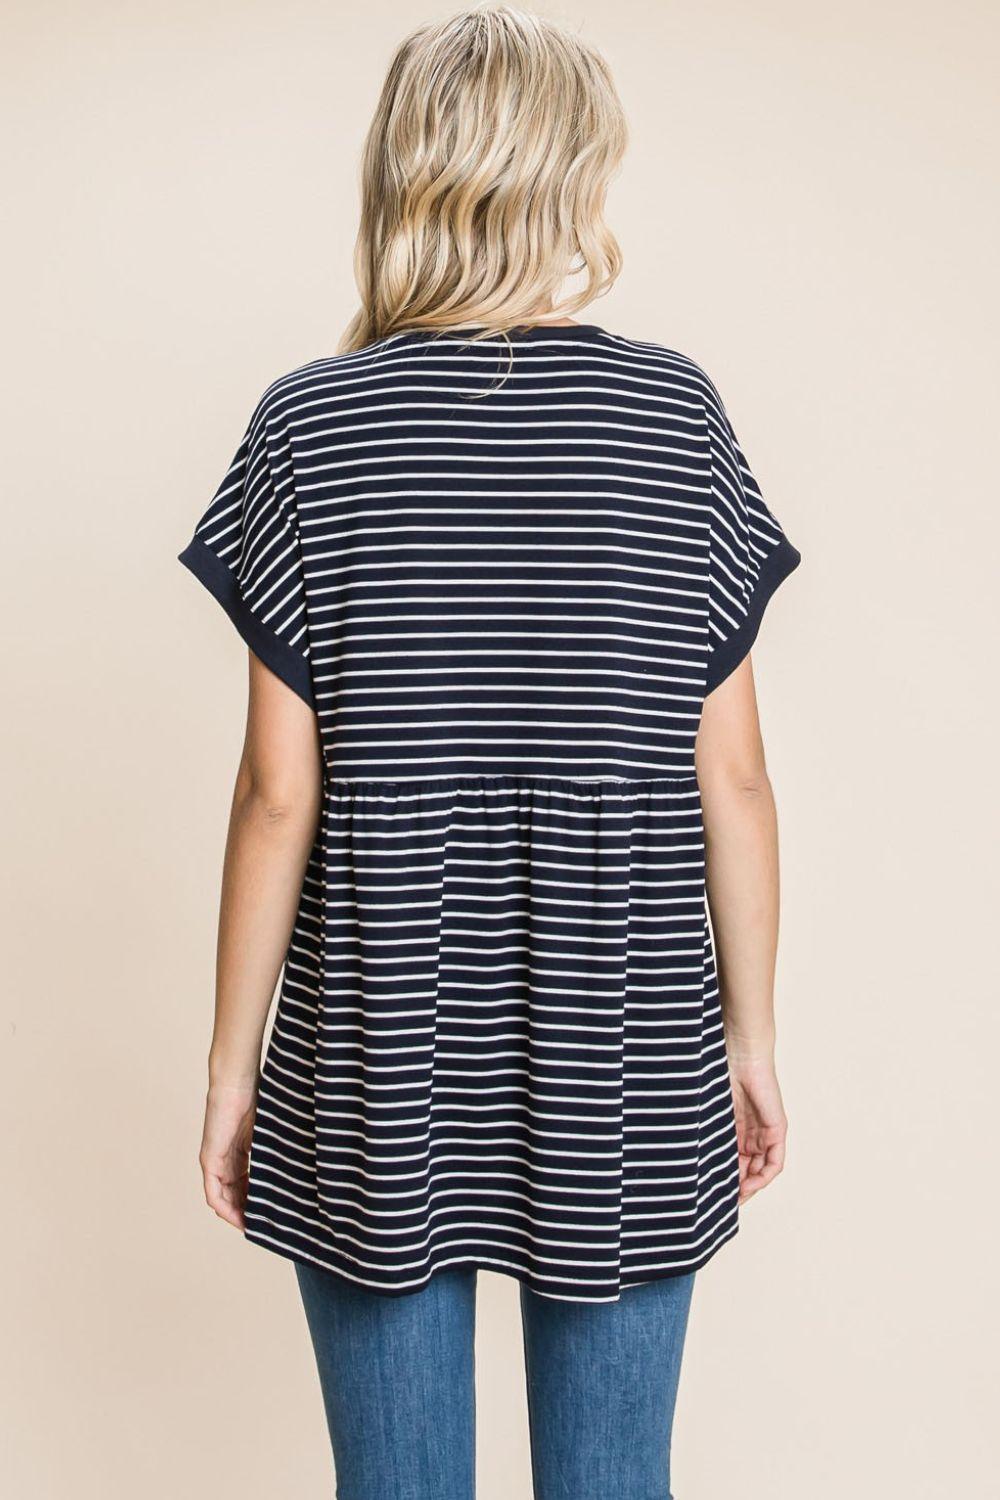 Cotton Bleu by Nu Label Striped Button Front Baby Doll Top - AMIClubwear